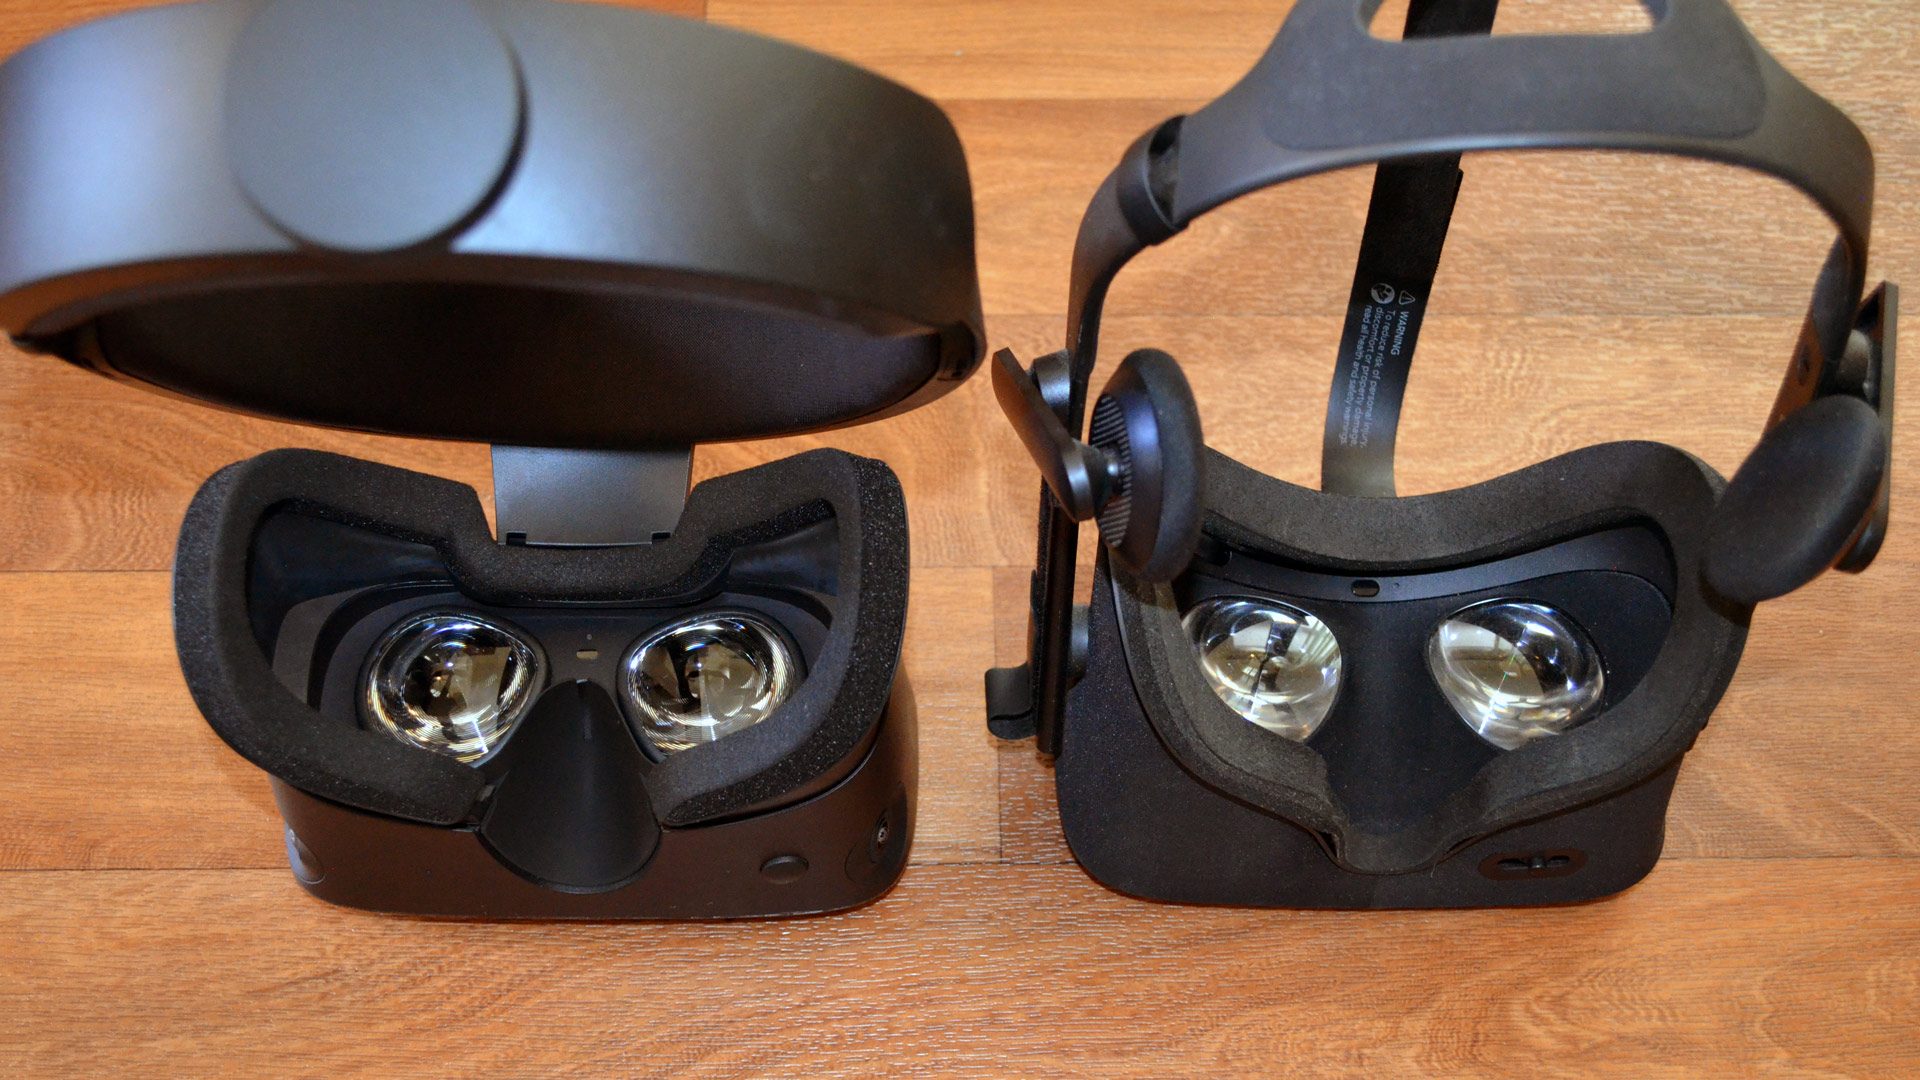 vr cover rift s review